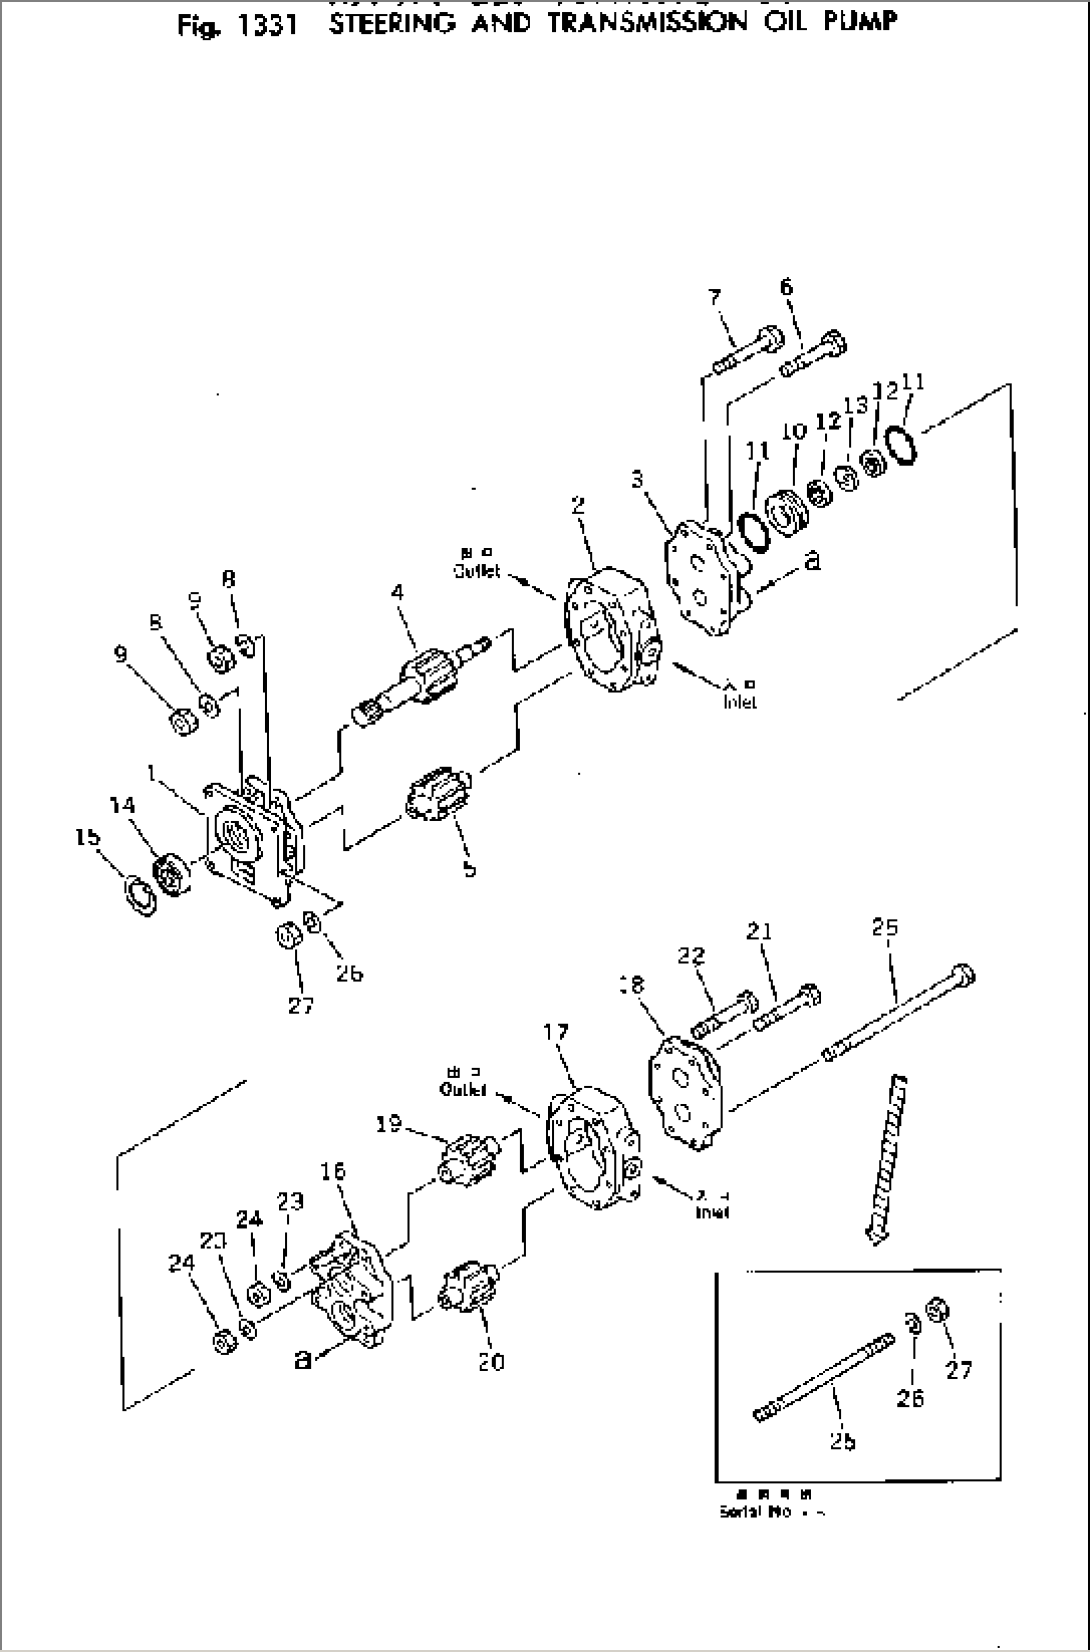 STEERING AND TRANSMISSION OIL PUMP